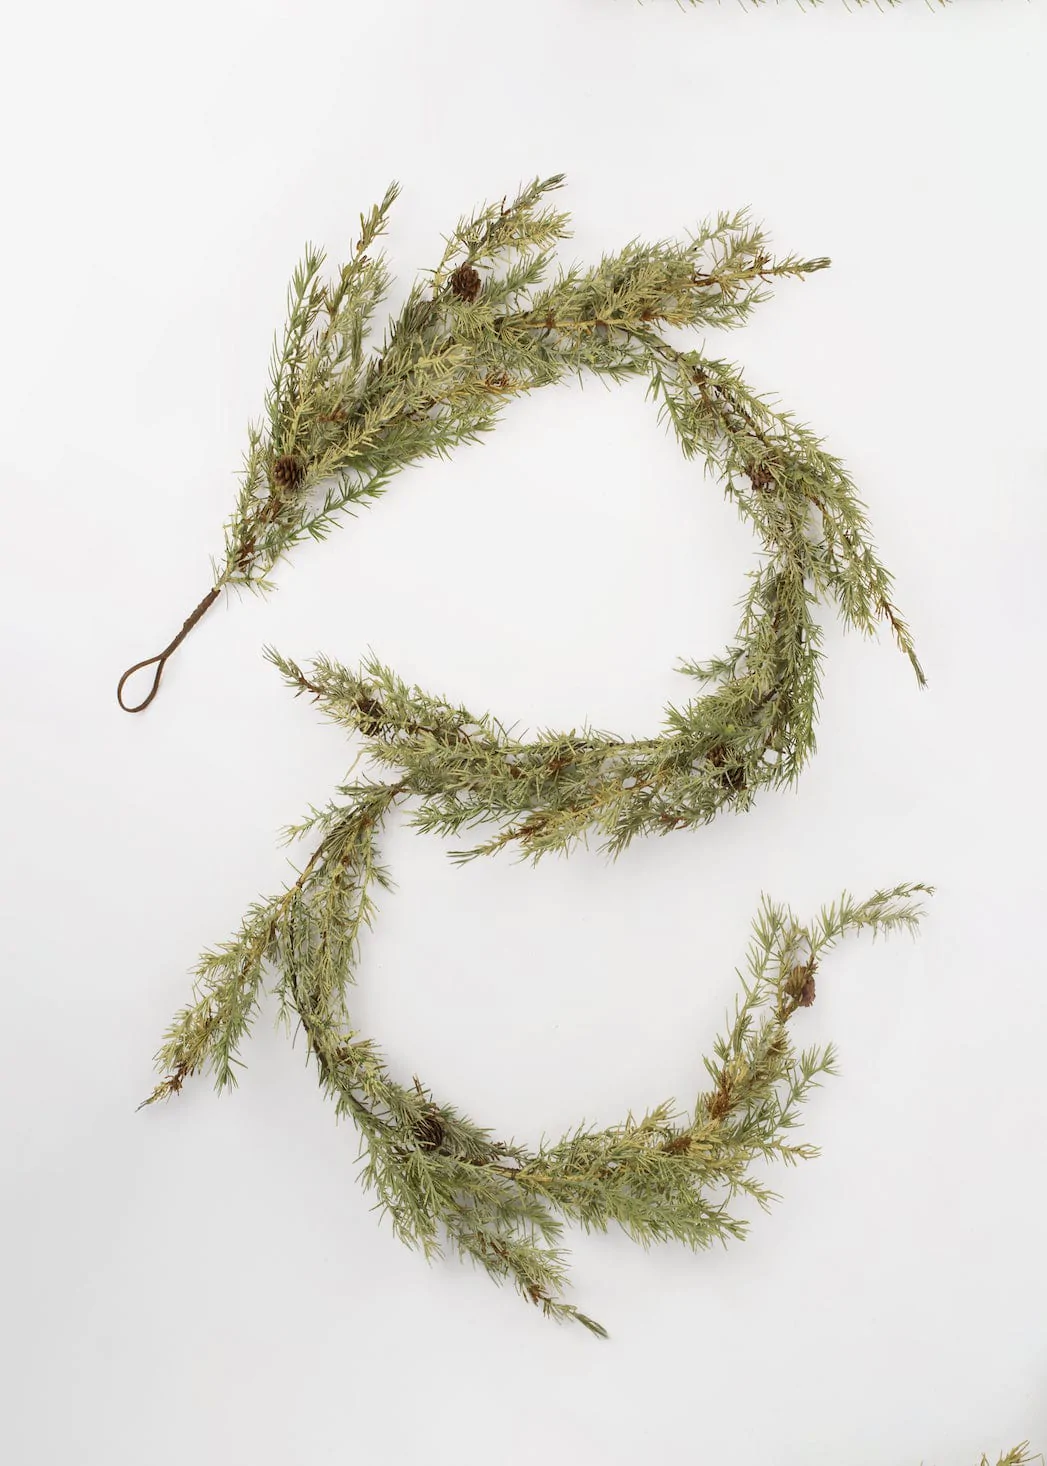 The best artificial garlands that give you the look of real greenery during the holidays and will never die so you can use them forever.